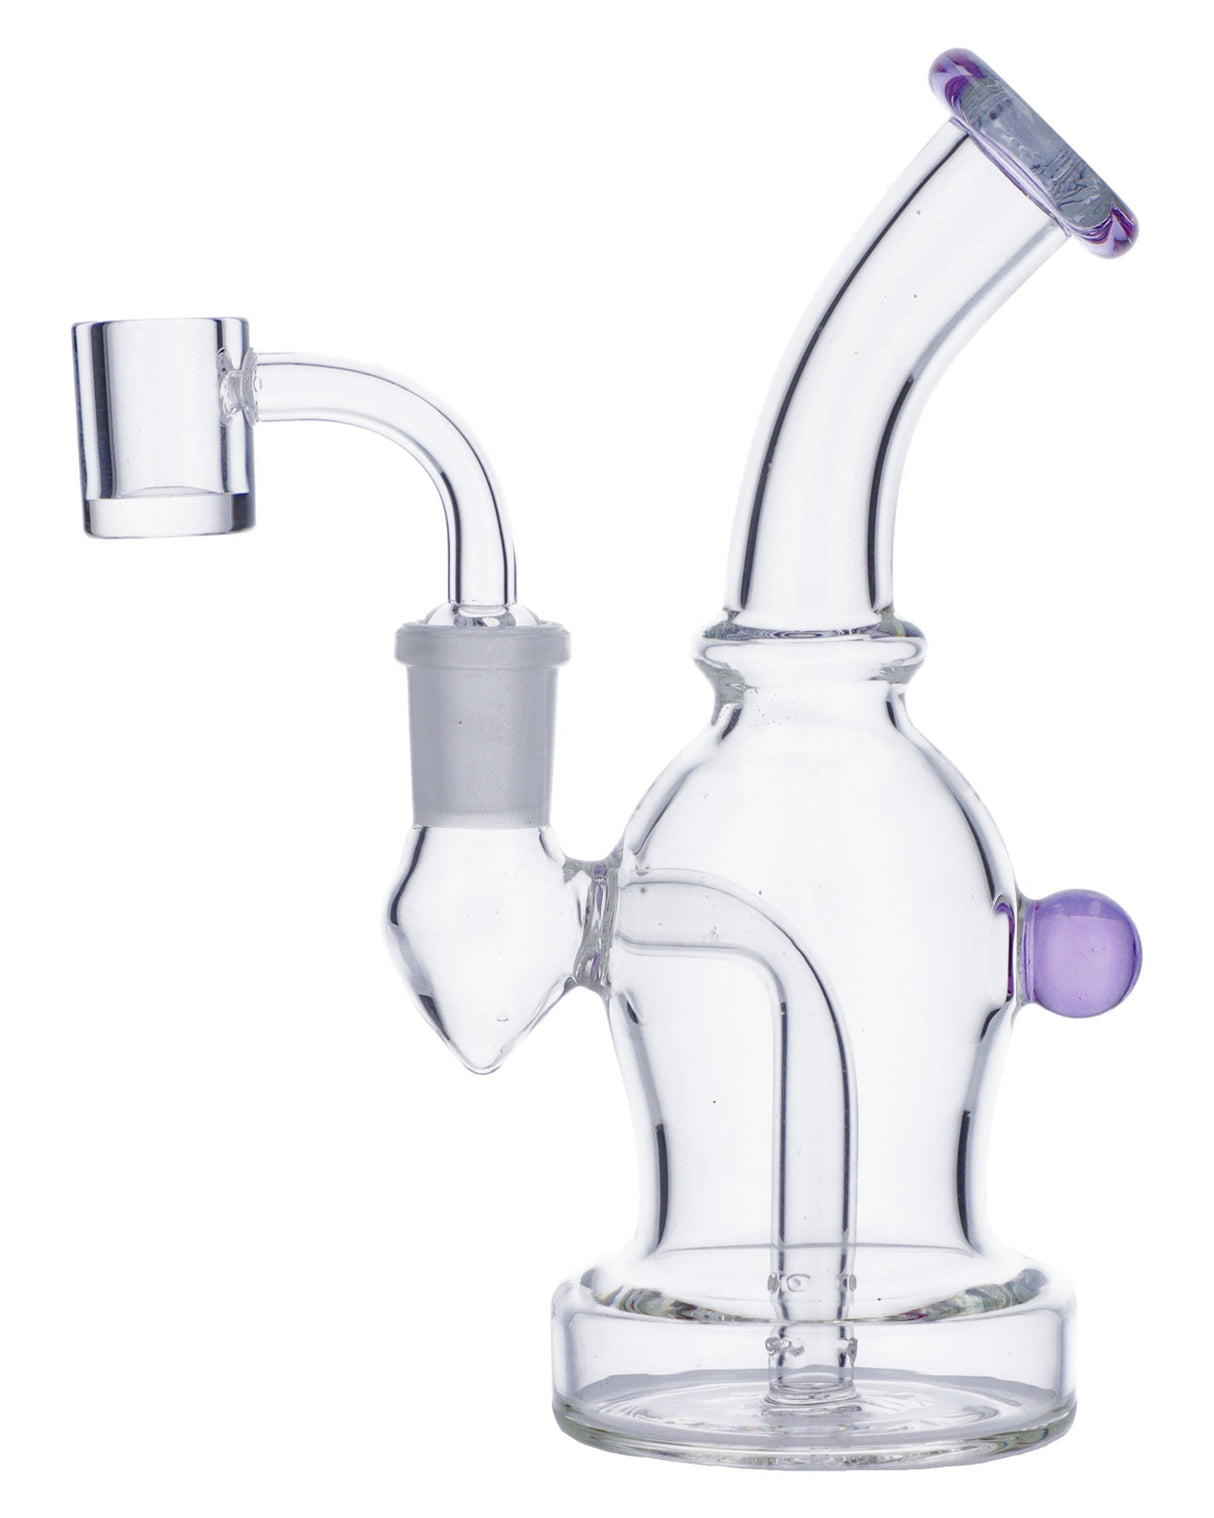 Quartz Banger Dab Rig by Valiant Distribution, 7" height, 90-degree joint, assorted color accents